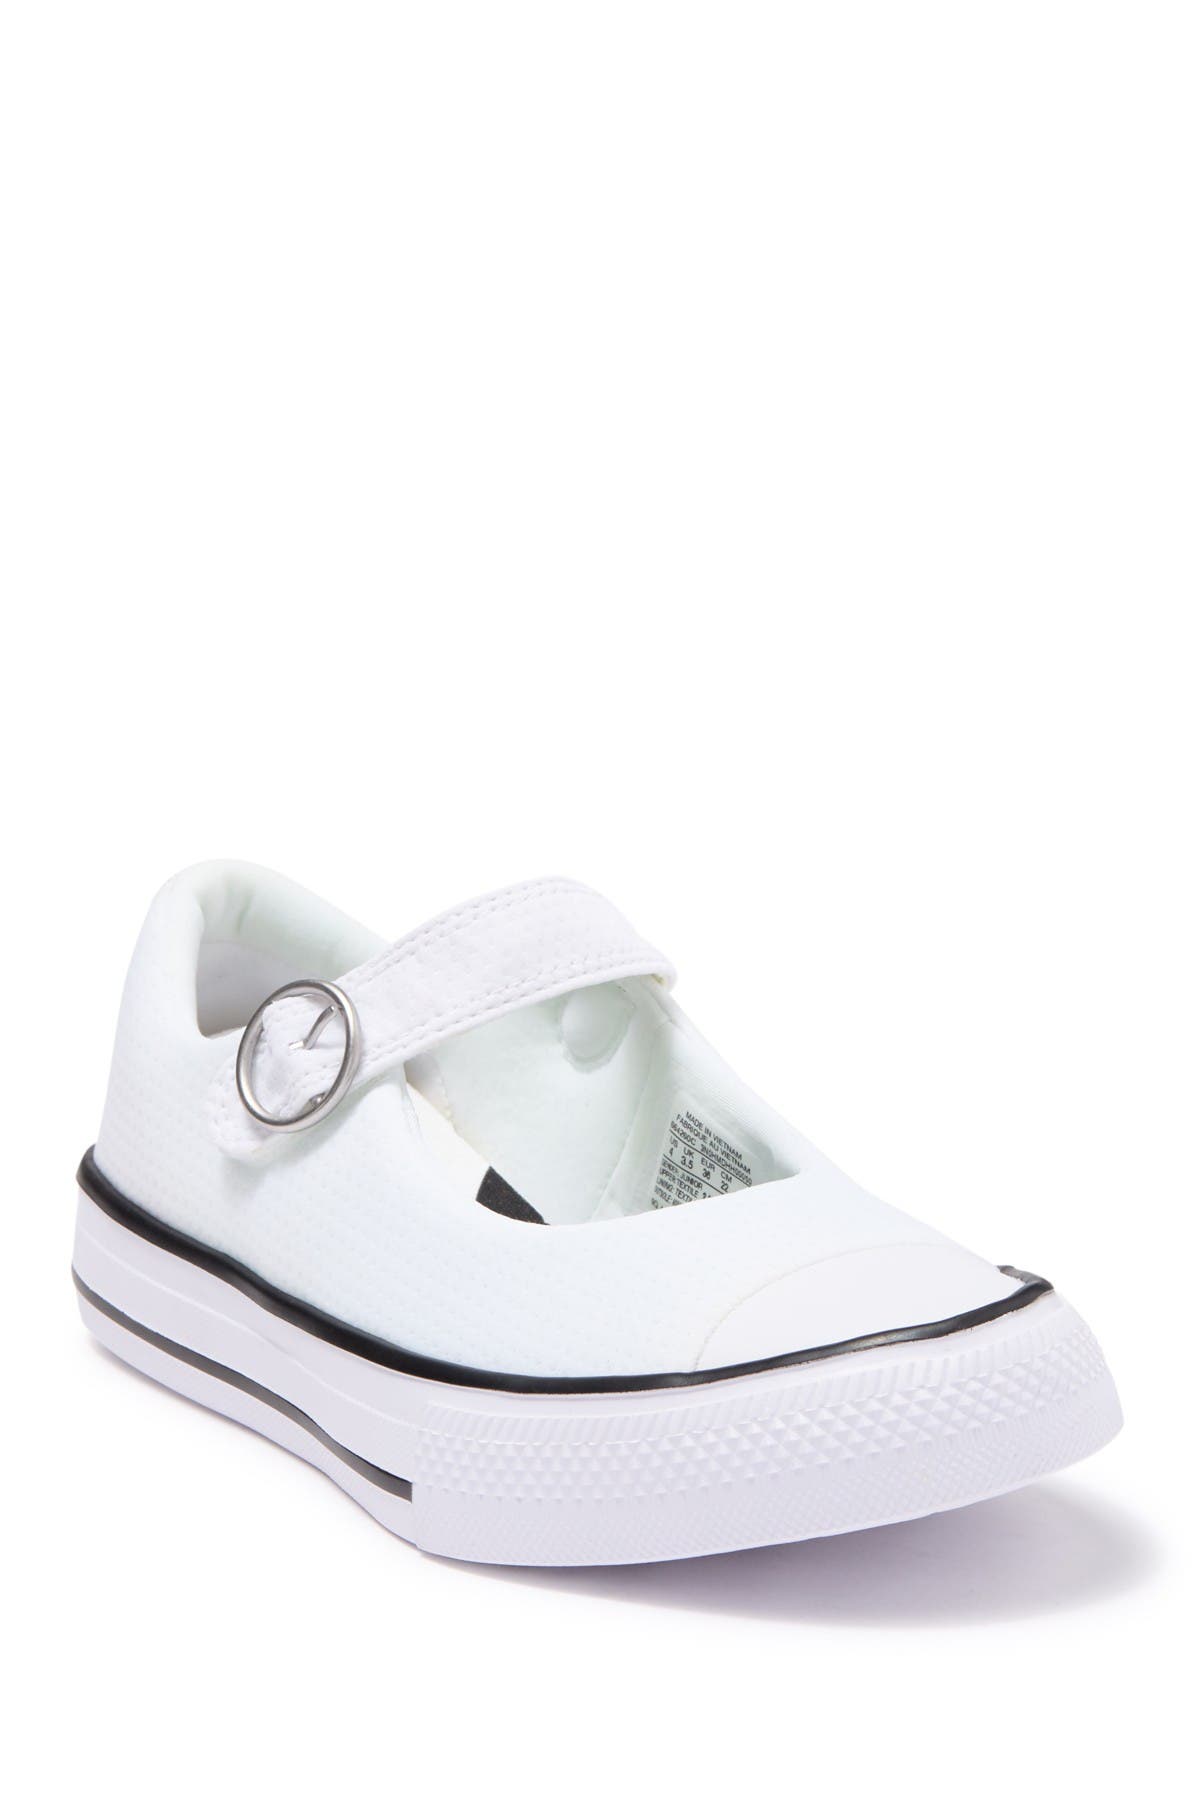 converse chuck taylor mary jane white canvas shoes